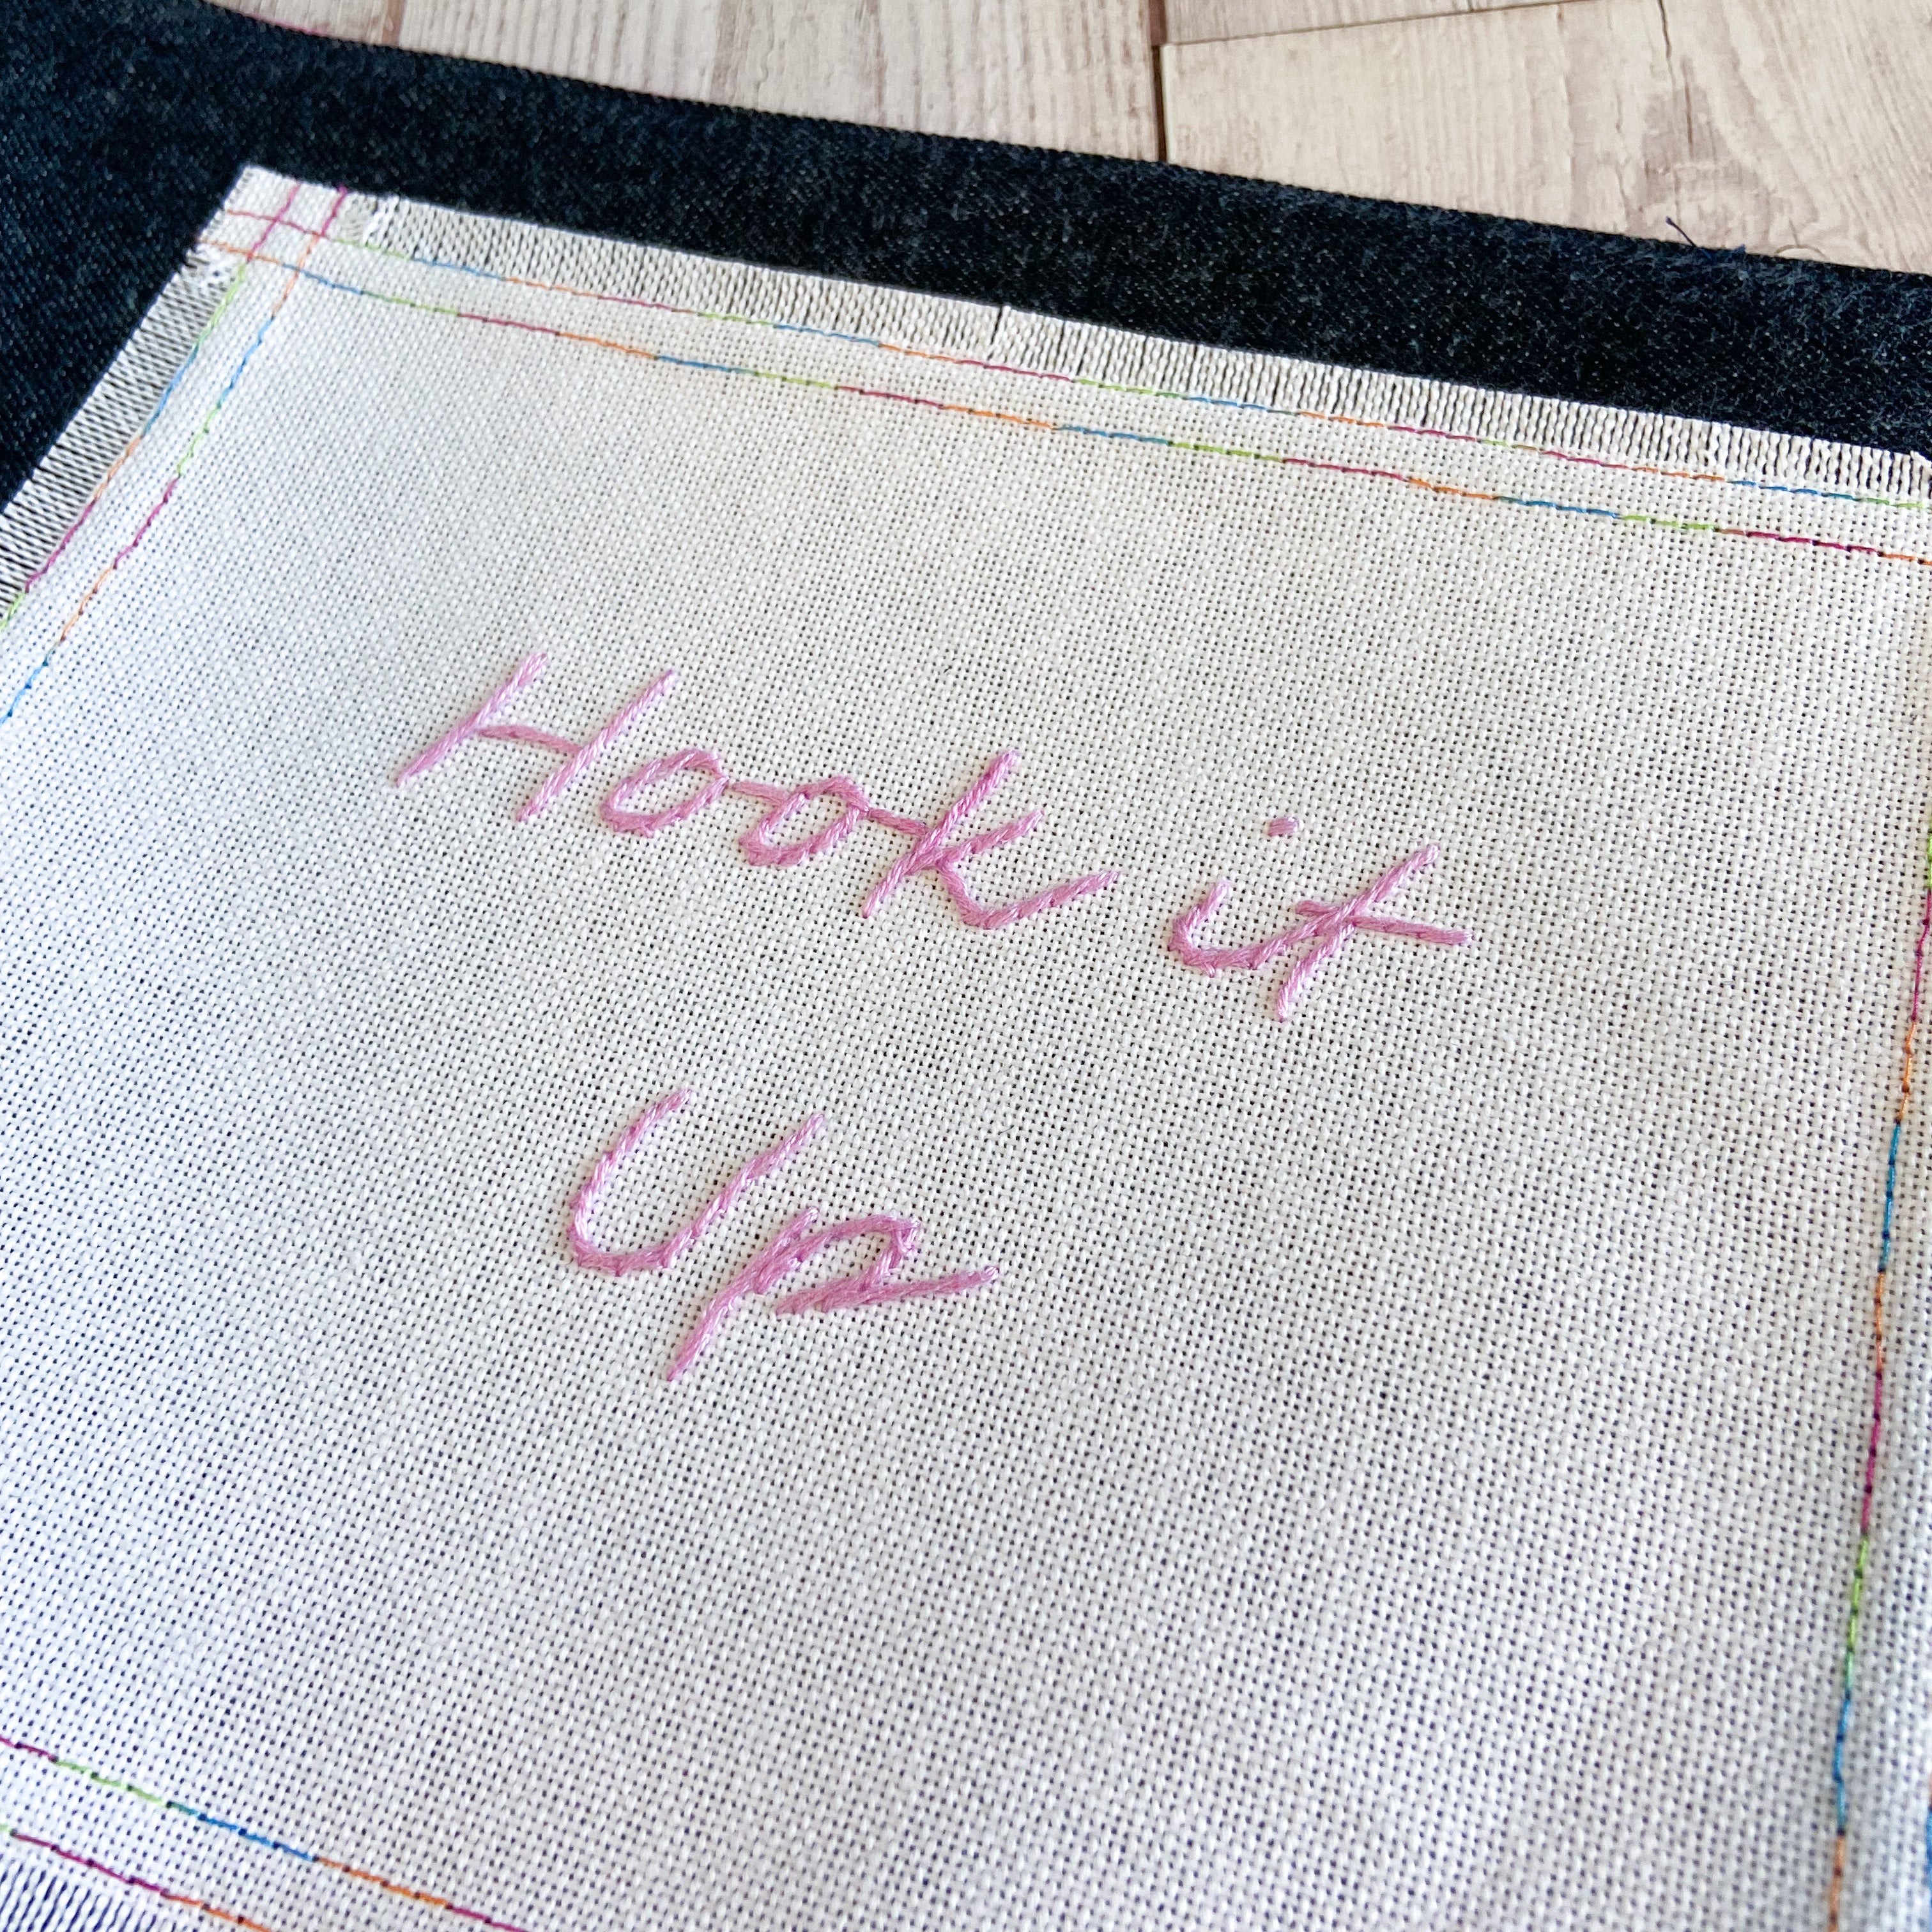 Denim - Large Hook it up Project Bag - White with Pink Embroidery